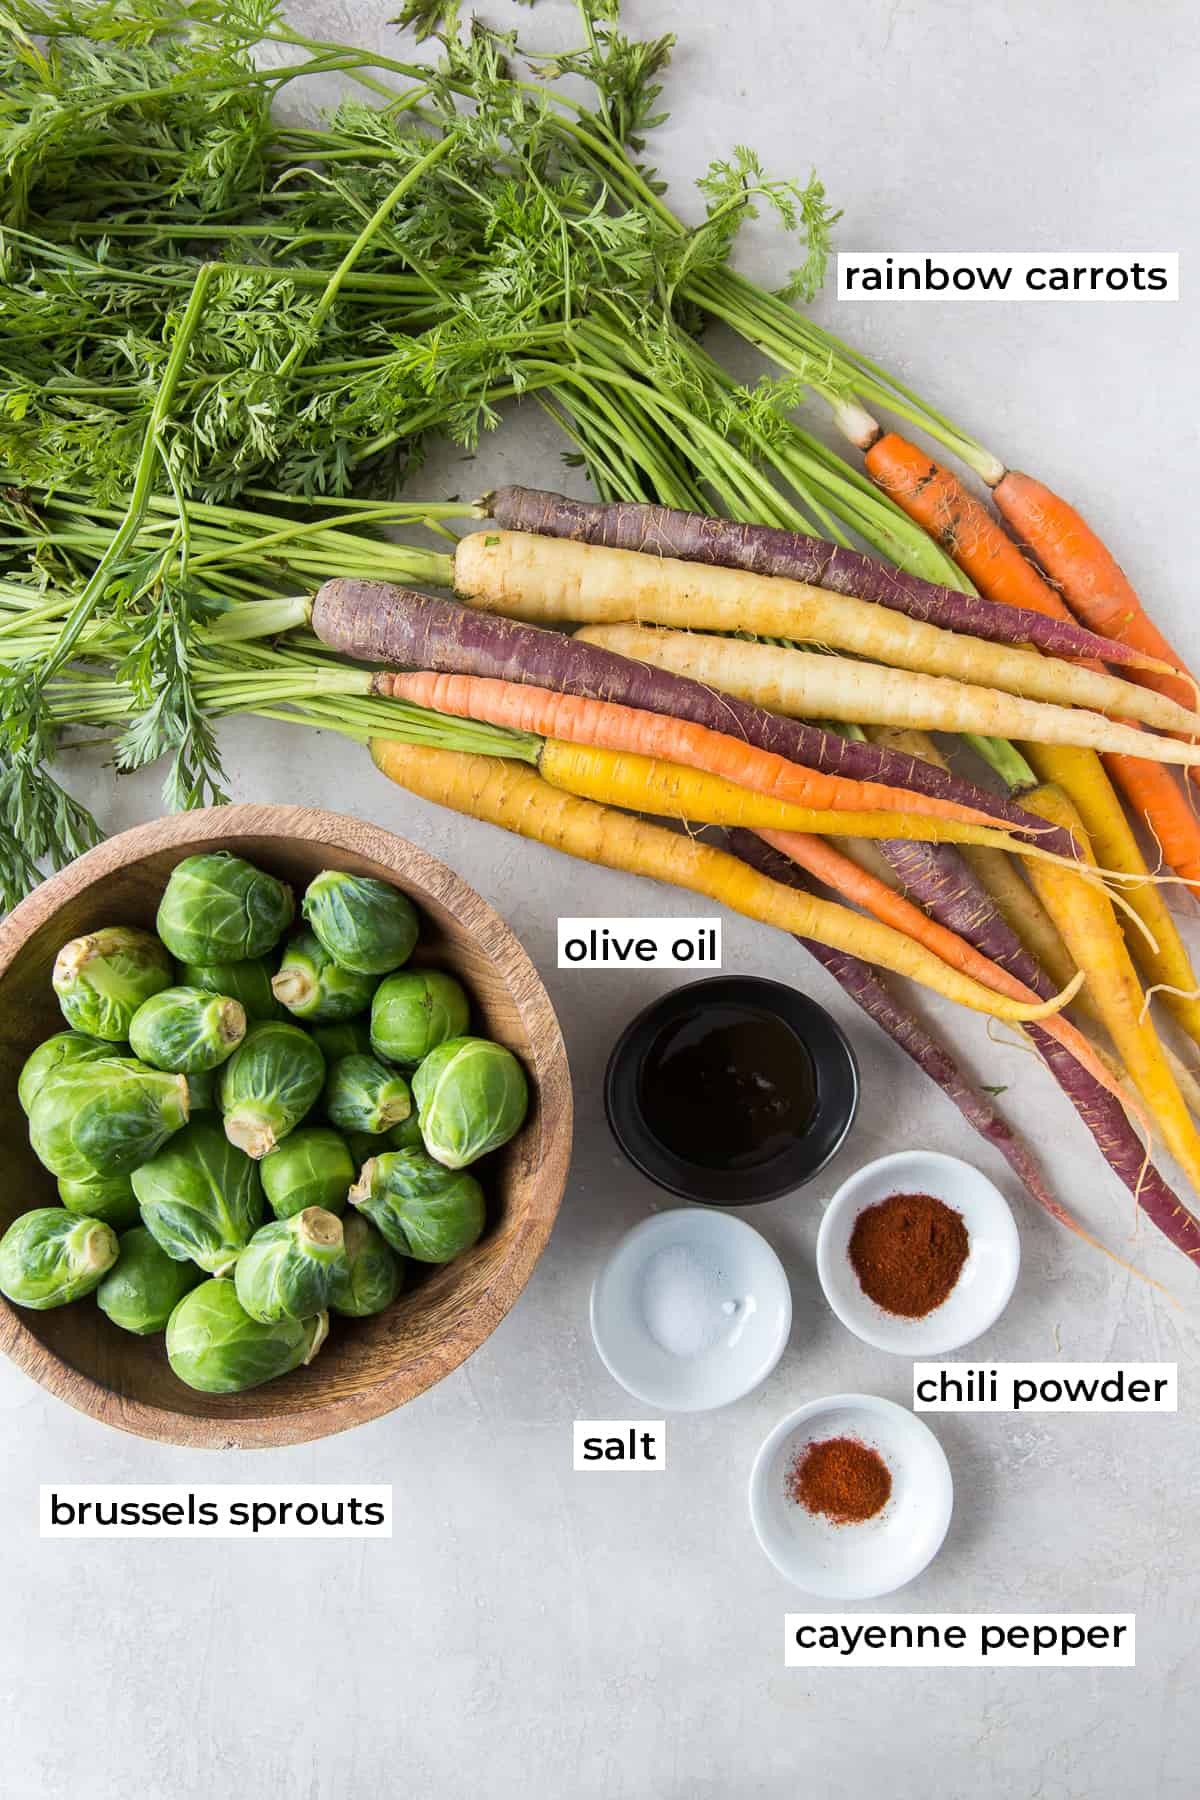 The ingredients for Honey Roasted Carrots and Brussels Sprouts with text overlay.